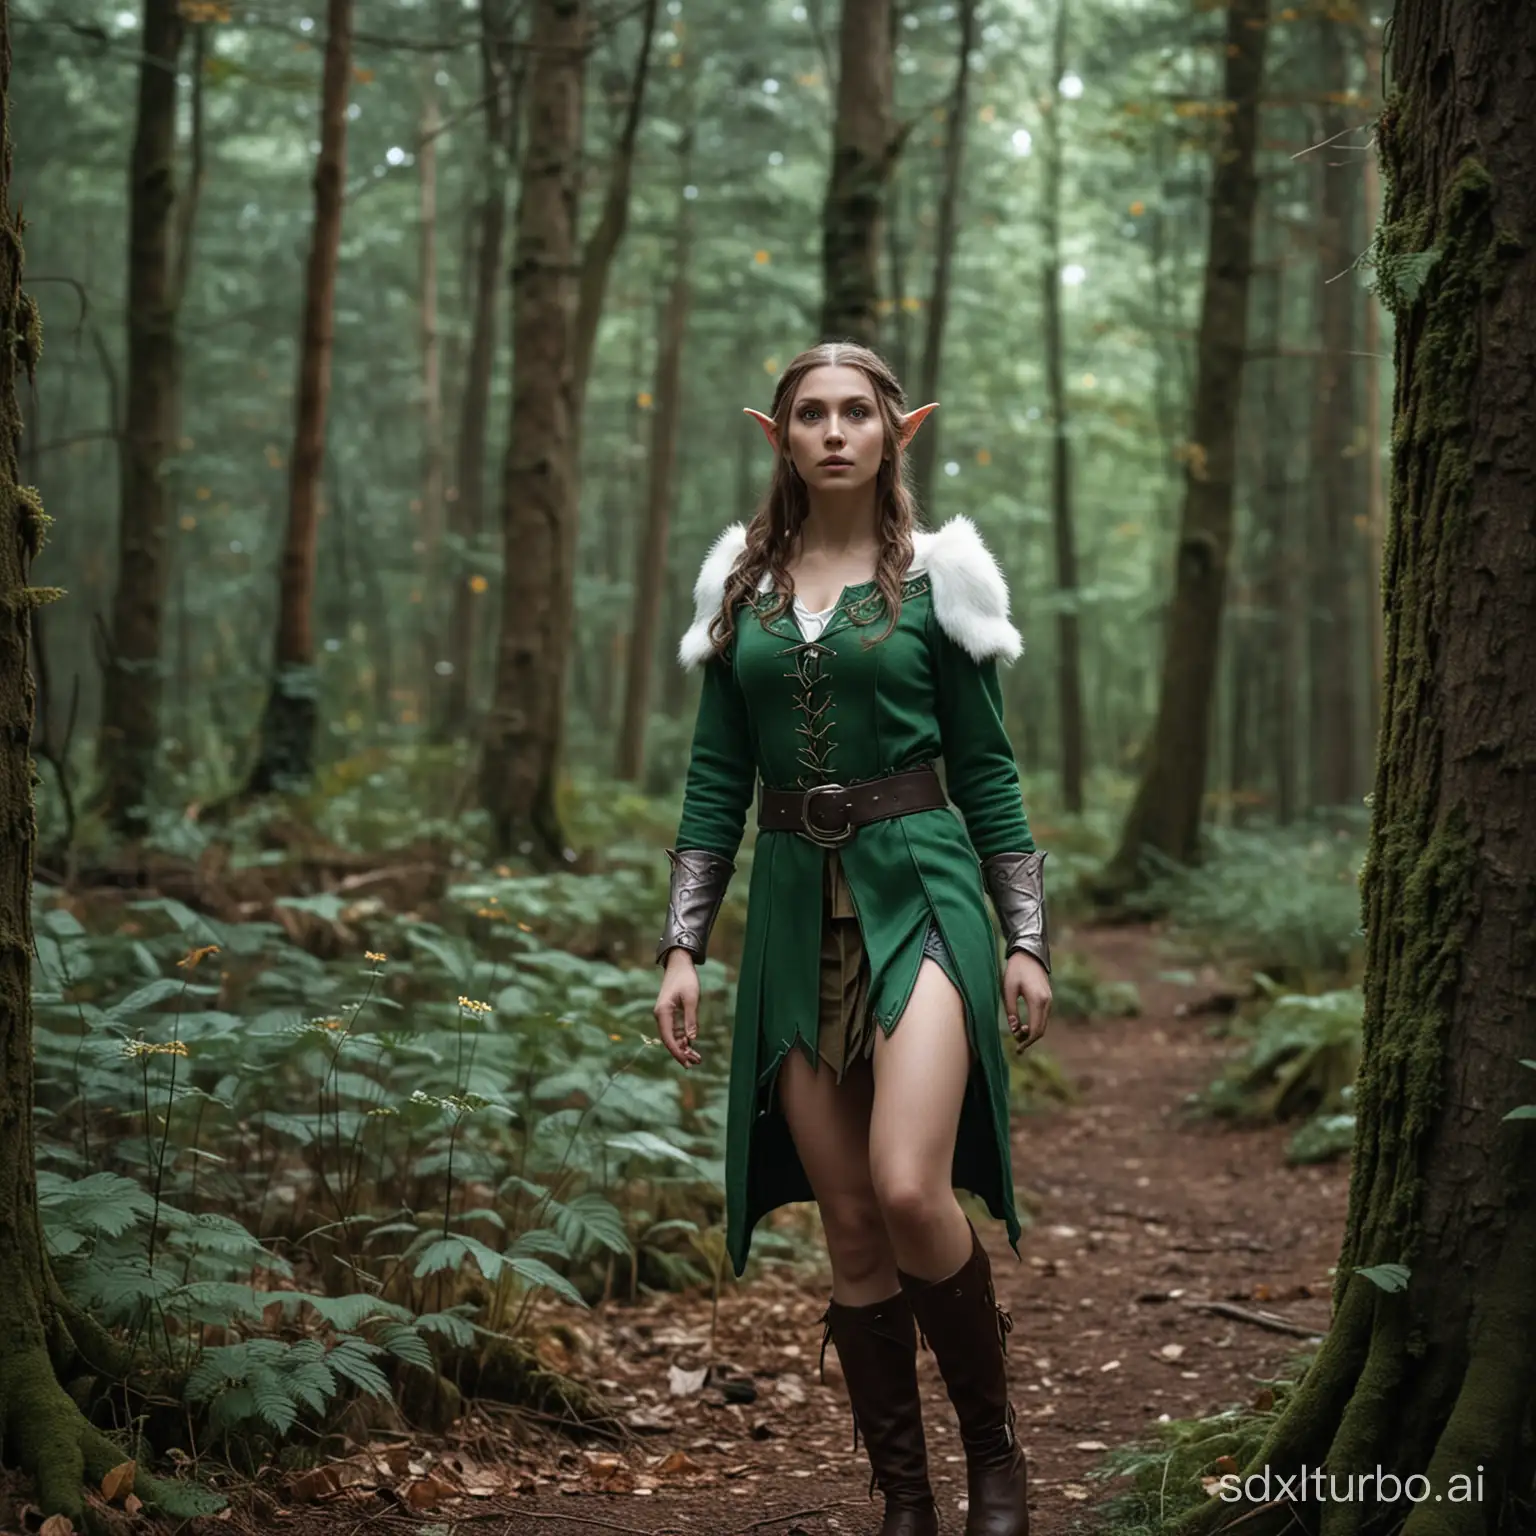 A female elf in the forest.